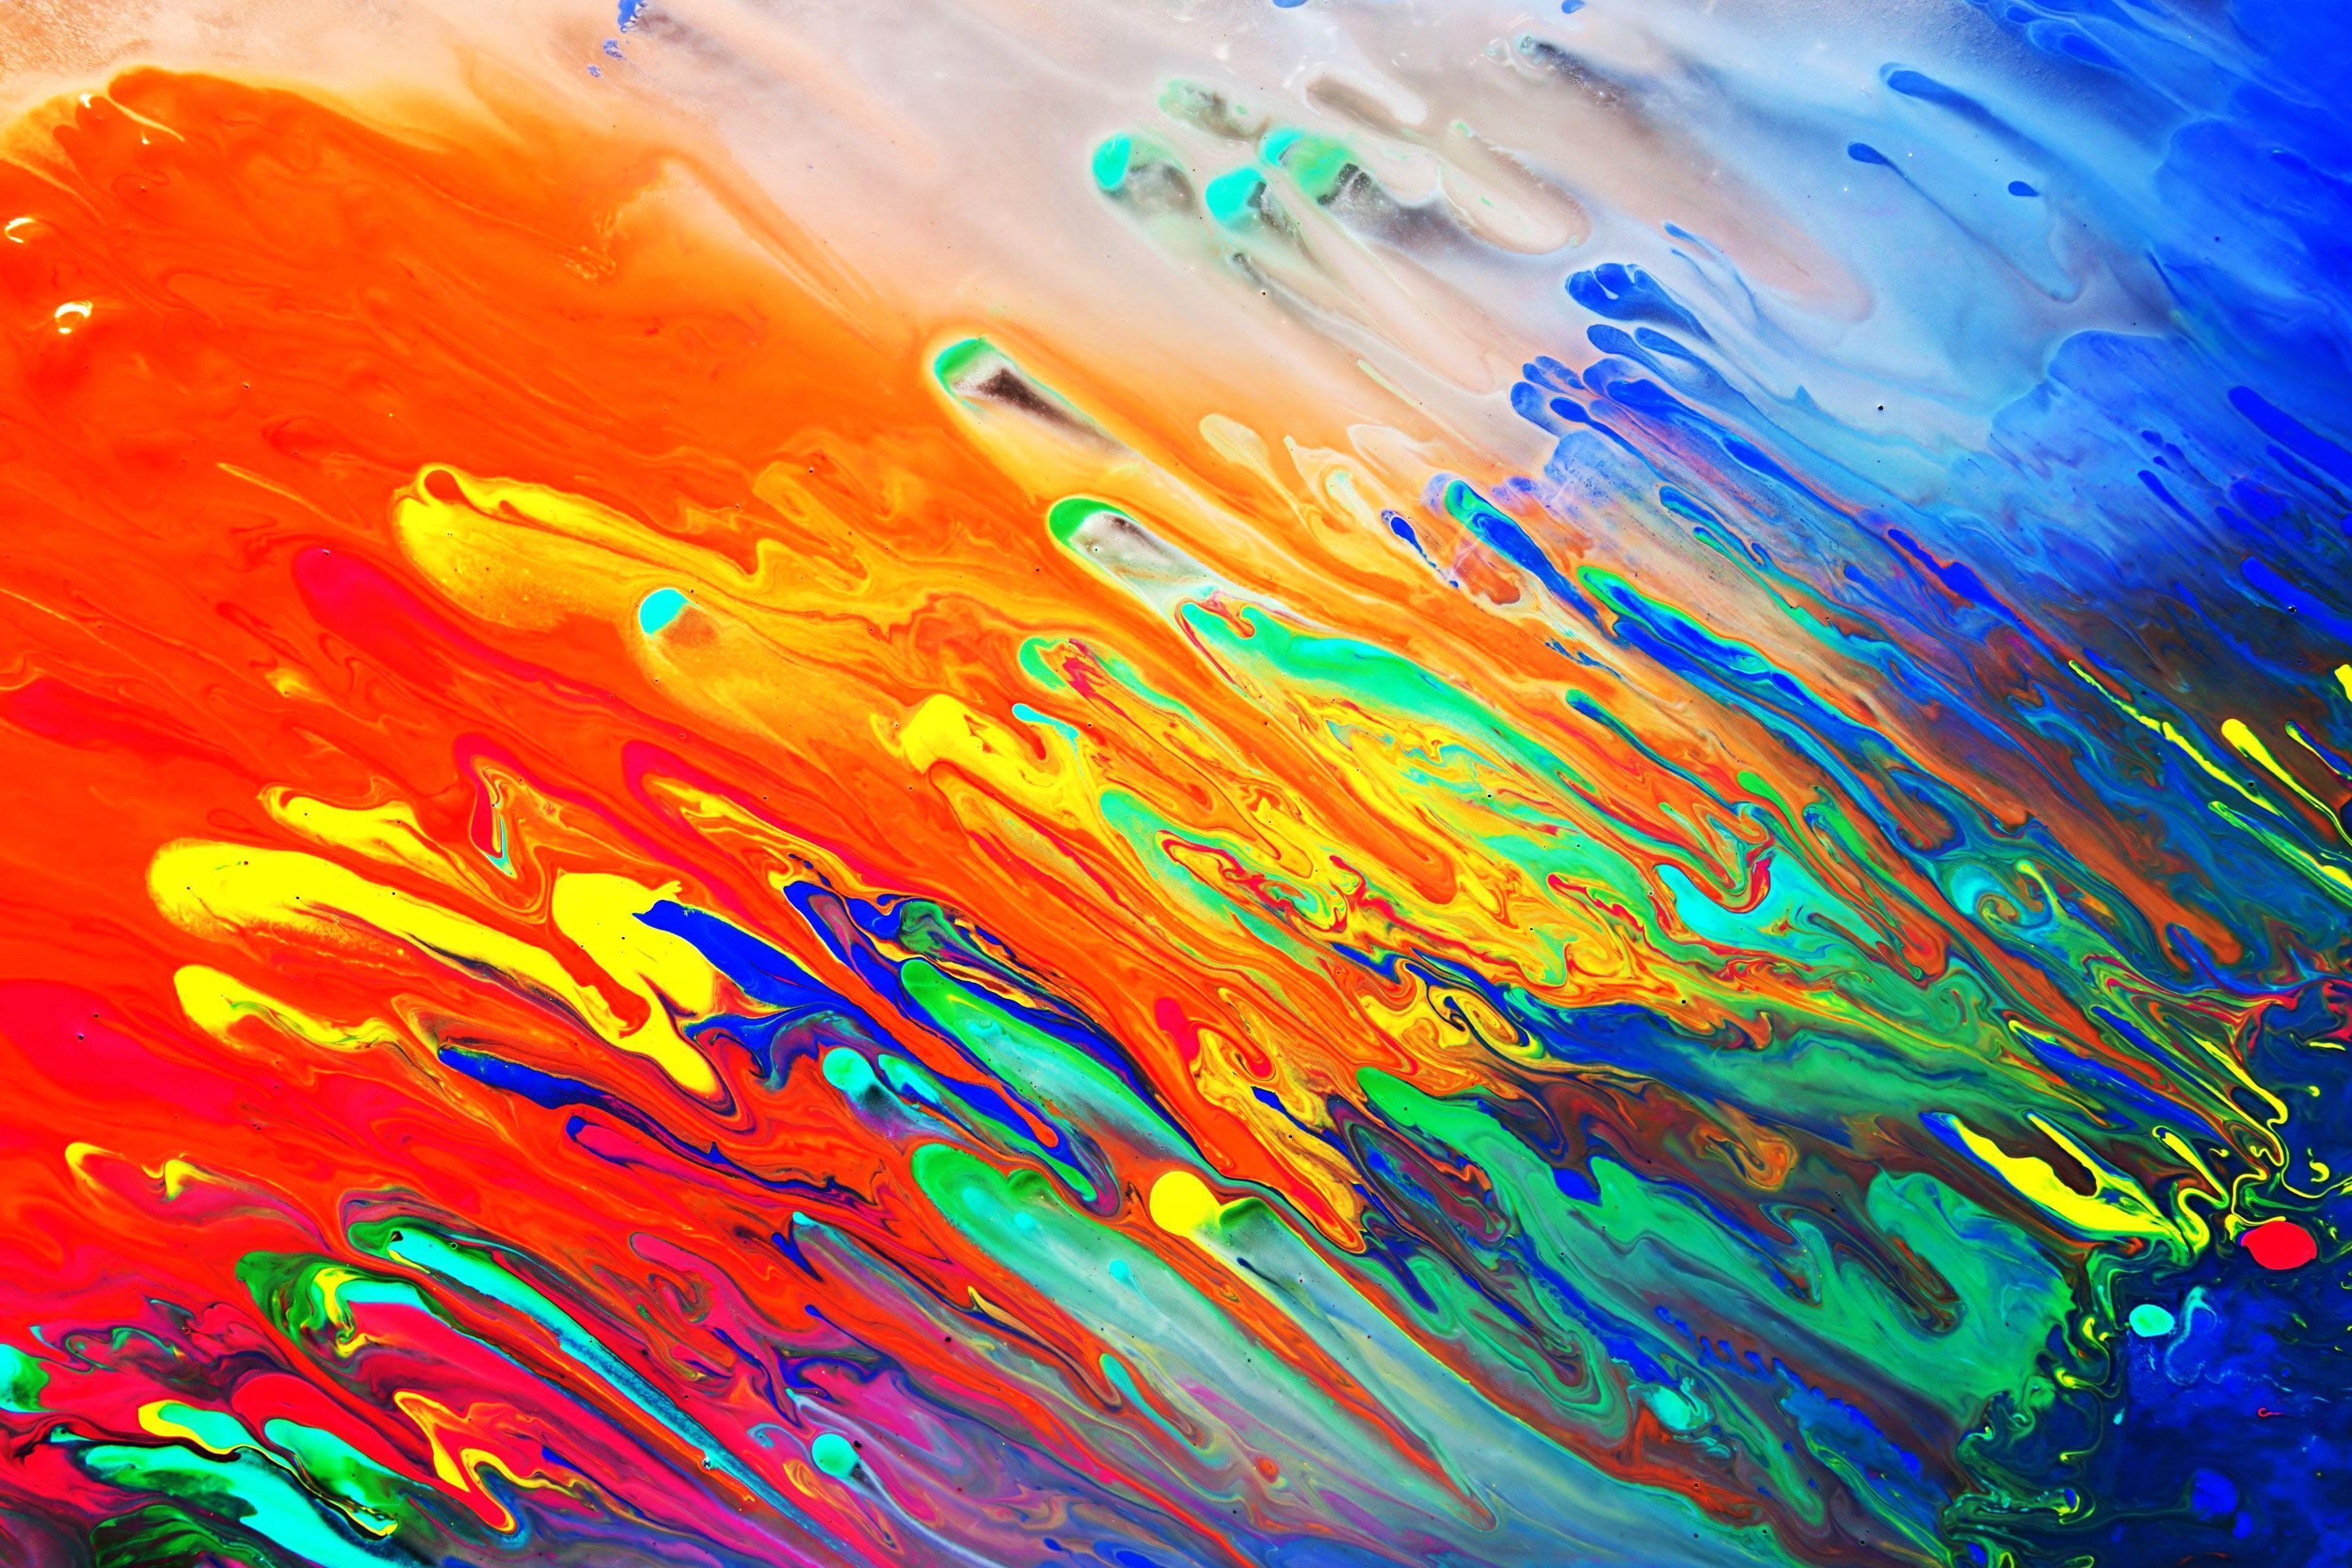 Oil, On, Canvas, Abstract, Art, Android Wallpaper, Cool Artworks